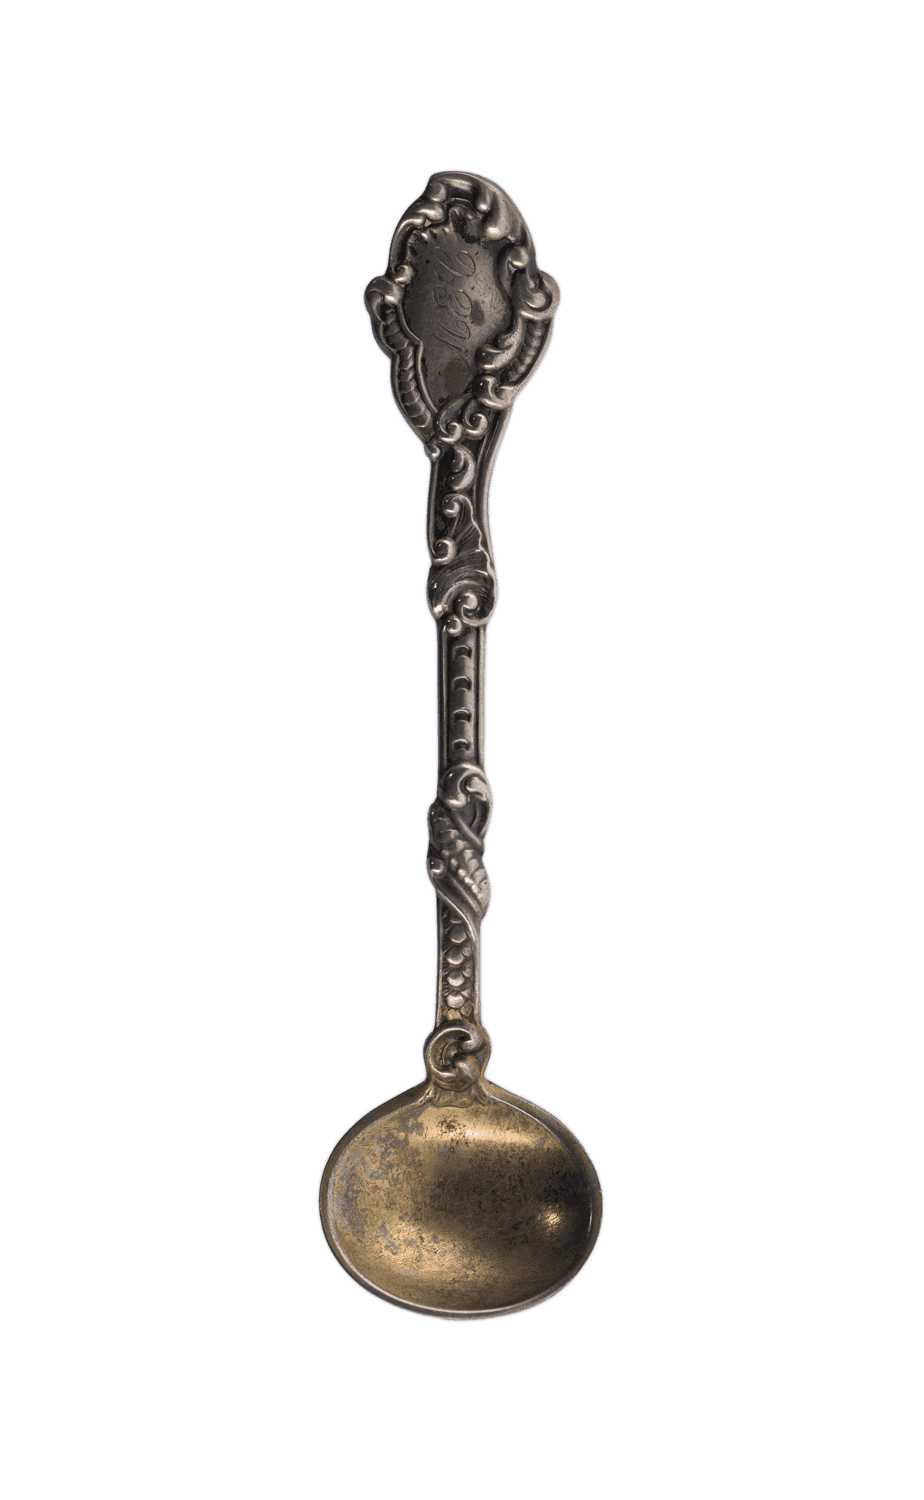 A sterling spoon with a decorative handle and very rounded bowl. The sterling is worn and dark grey.